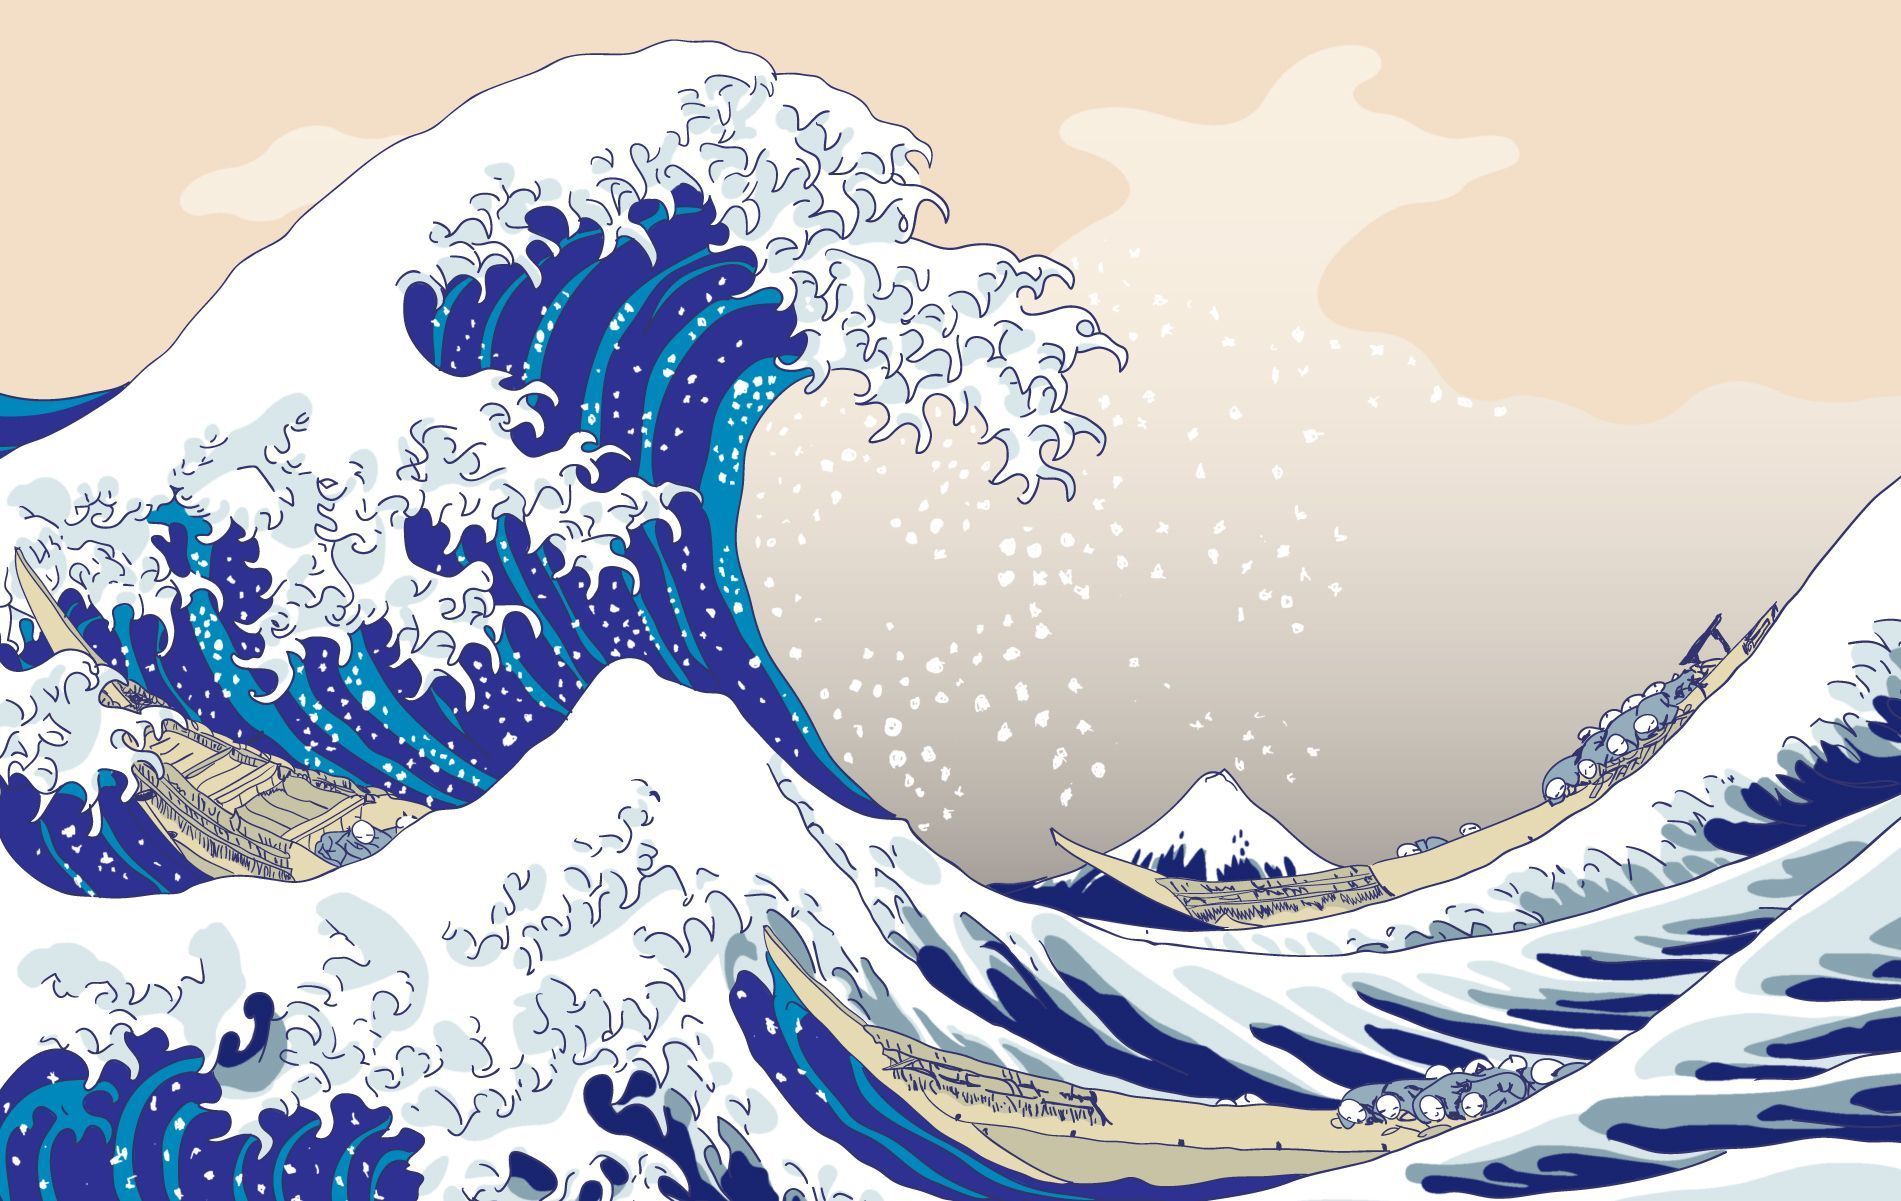 The great wave off kanagawa, also known as 'the big waves of kanazaw - Wave, The Great Wave off Kanagawa